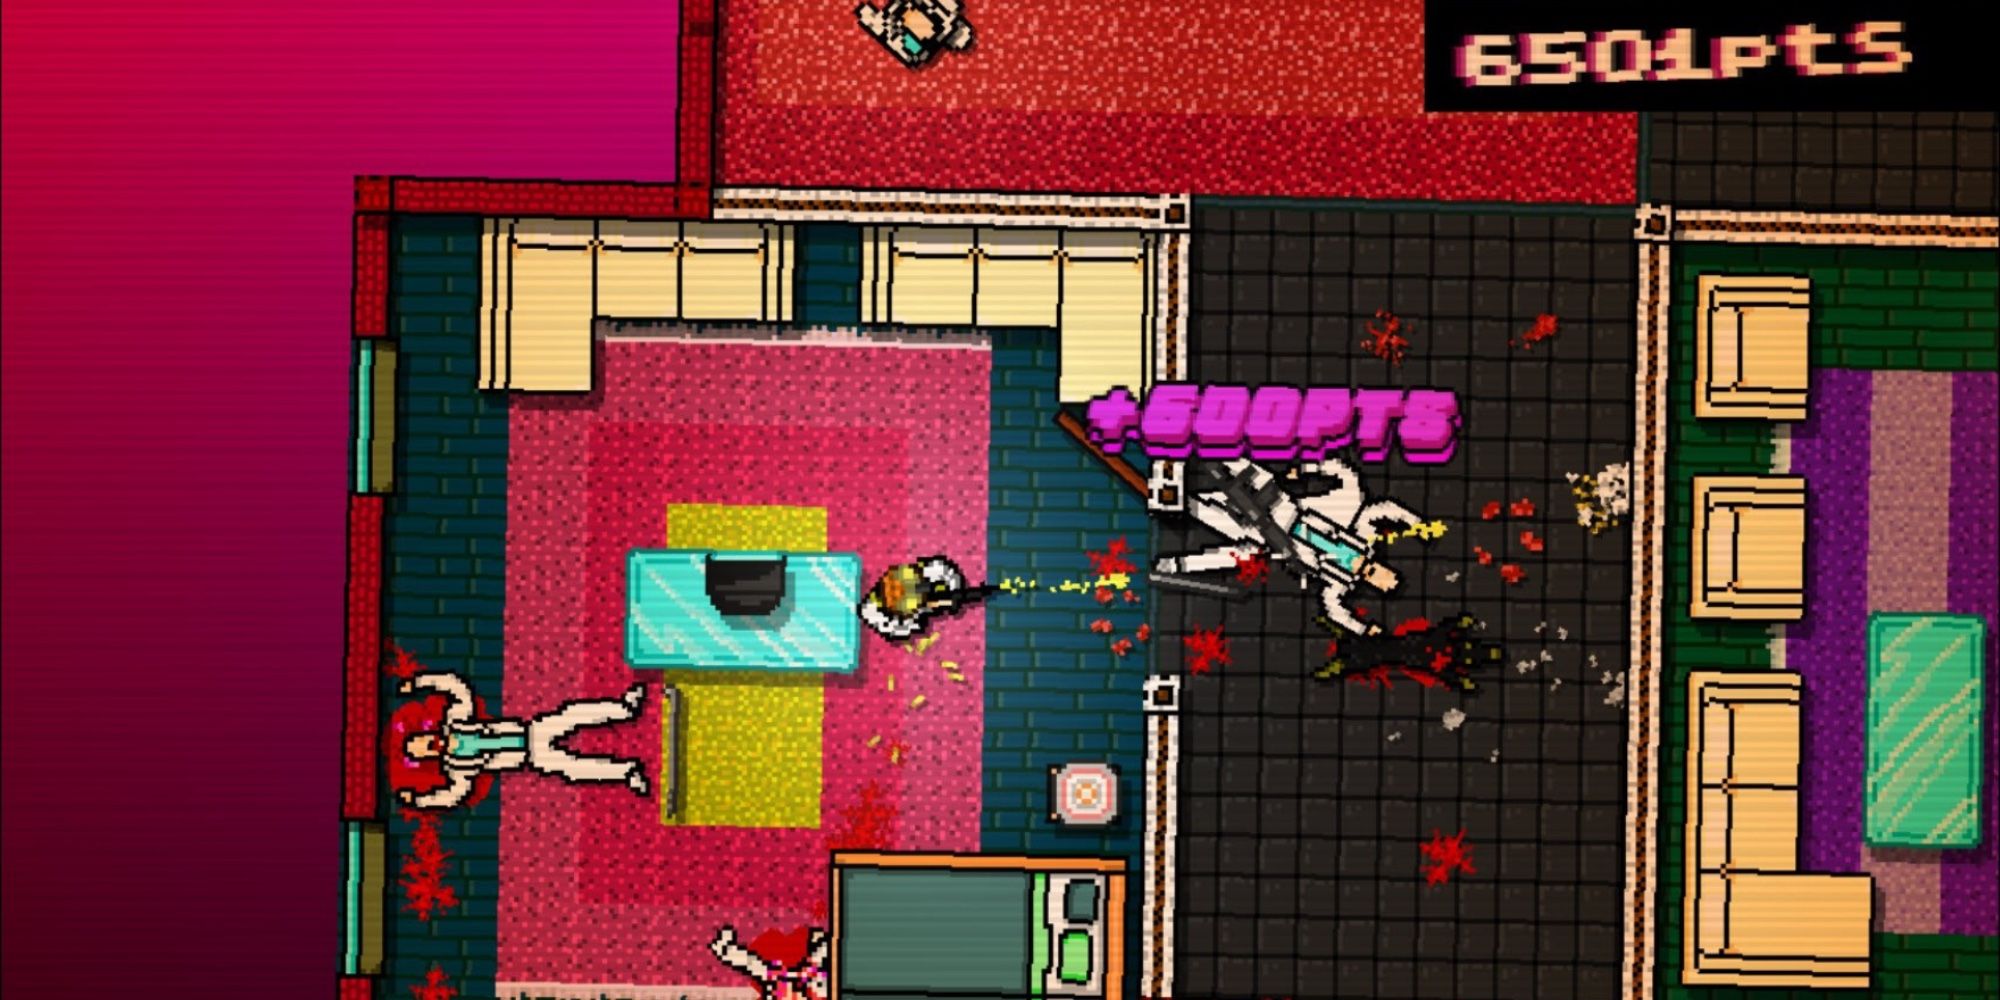 Aged Games Worth Playing in 2022 - Hotline Miami - Player clears stage